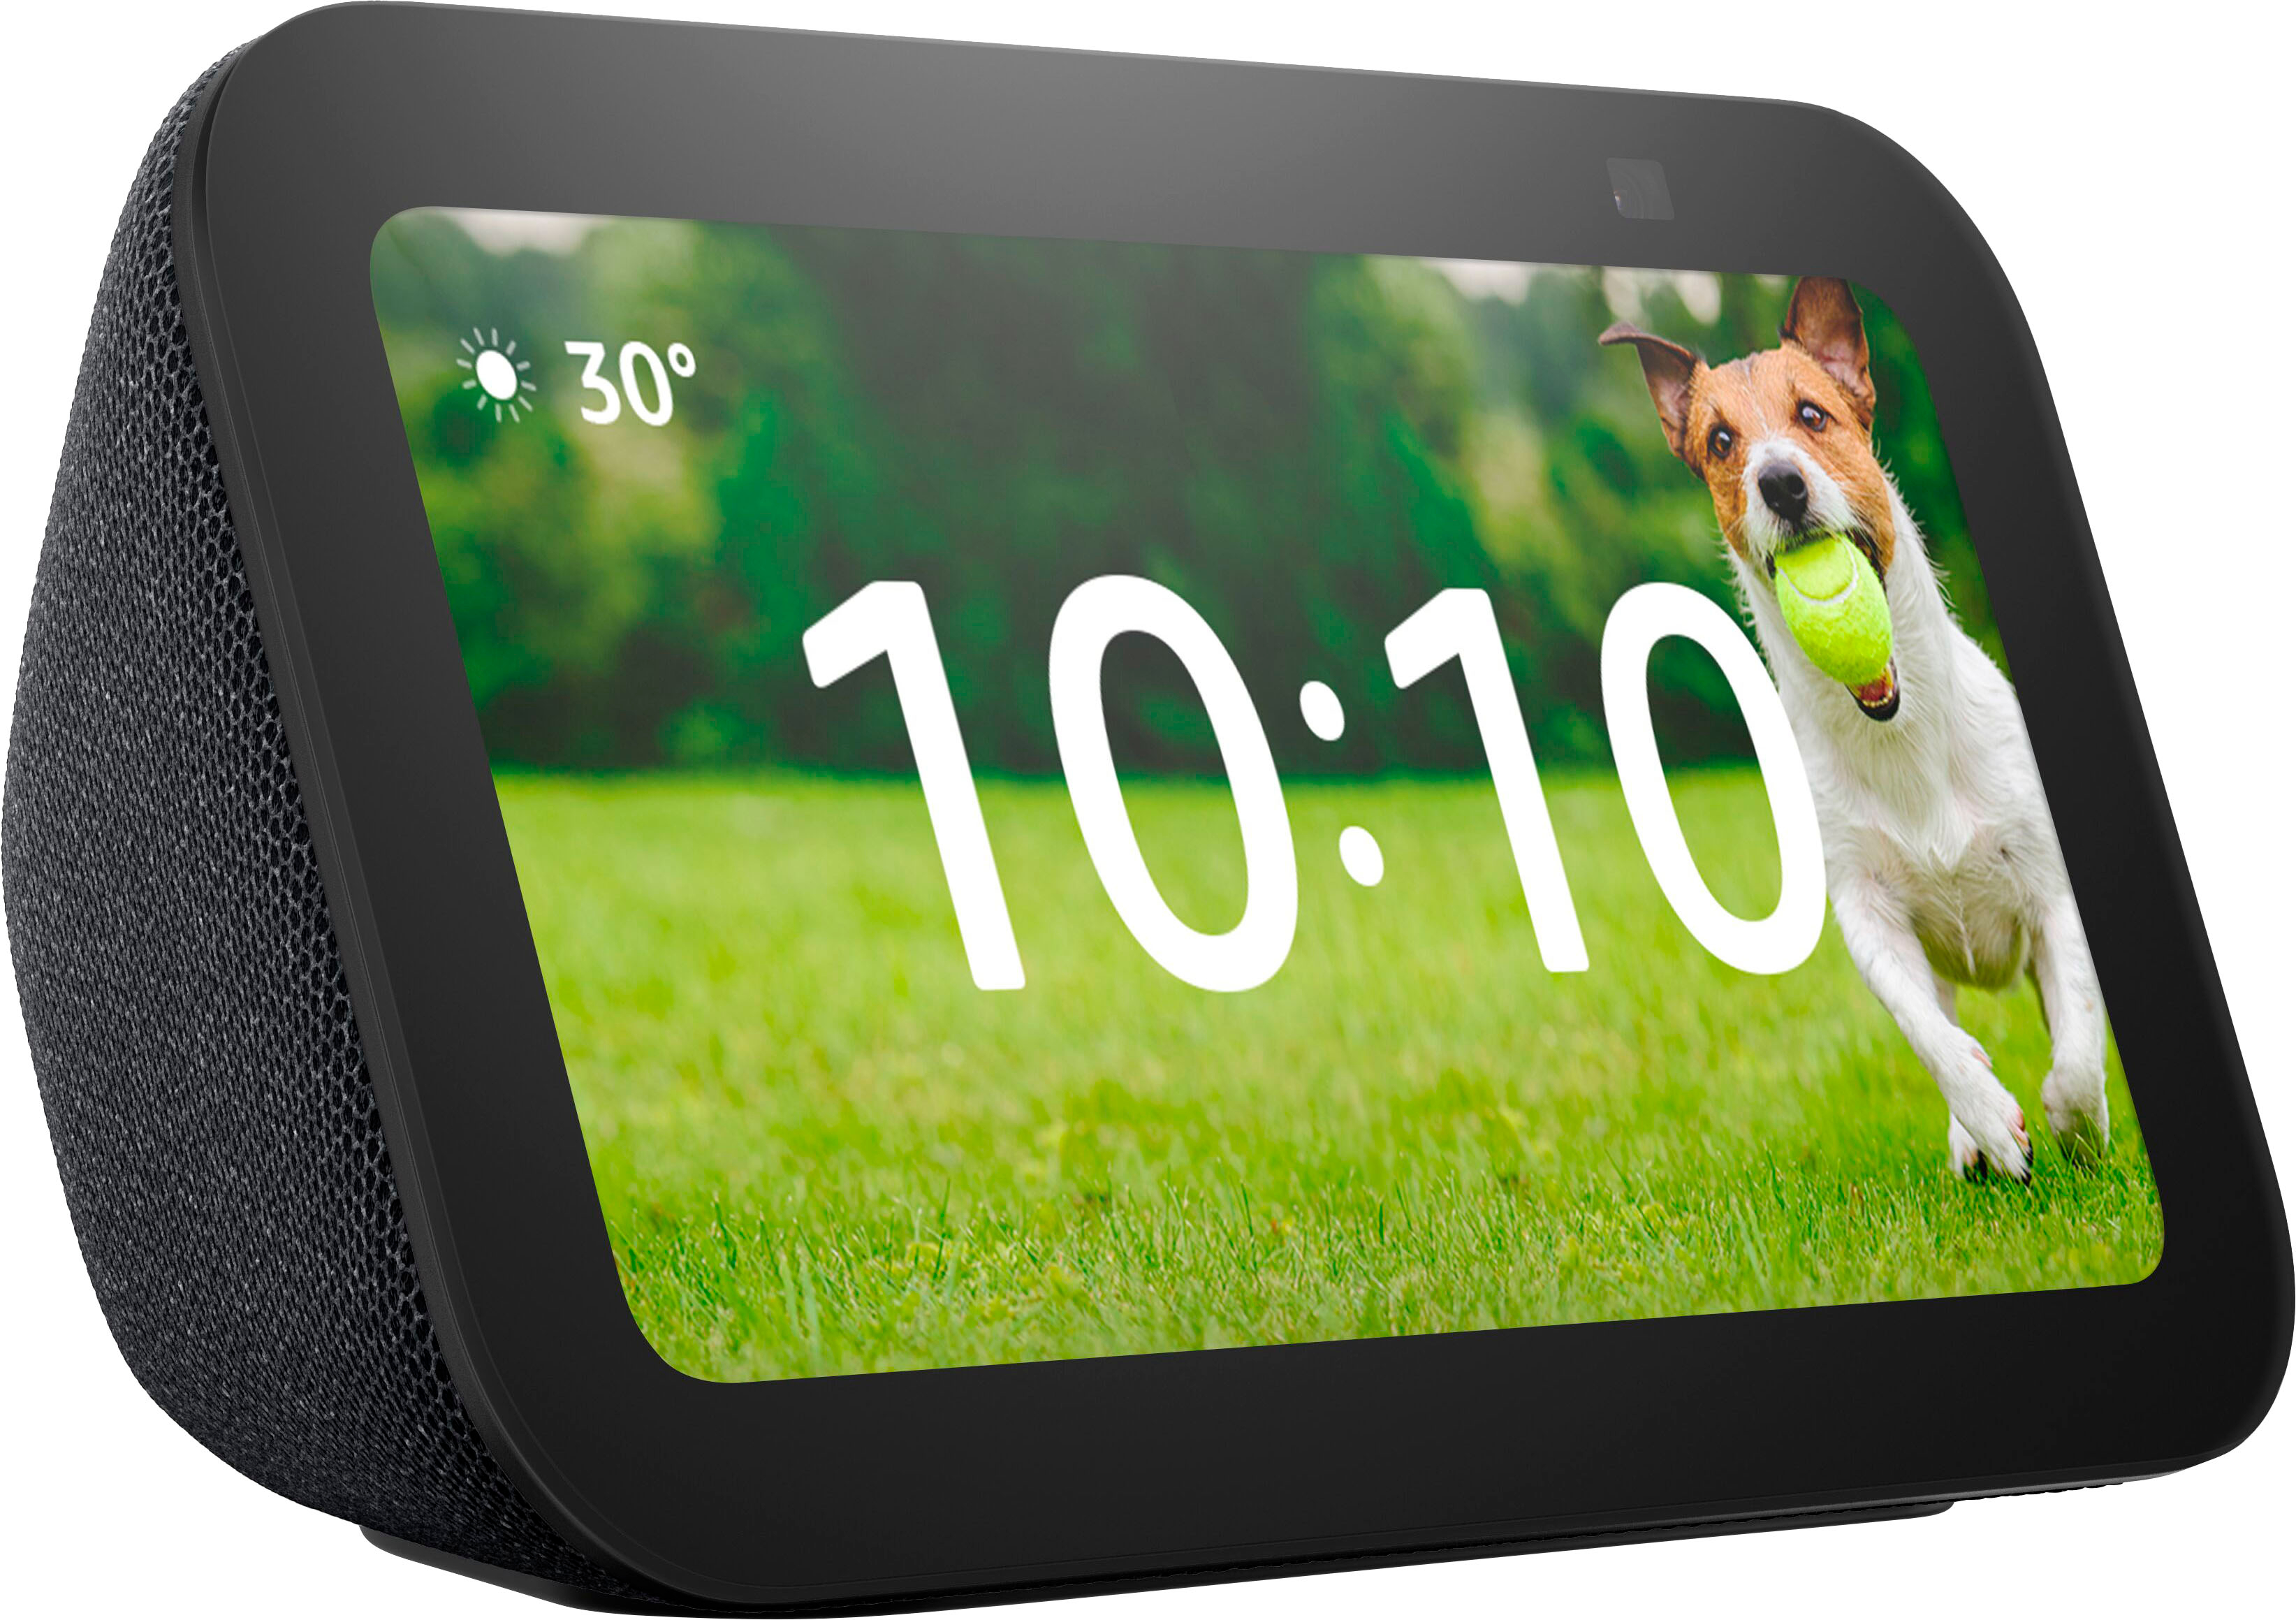 Amazon Echo Show 5 (3rd Generation) 5.5 inch Smart Display with 